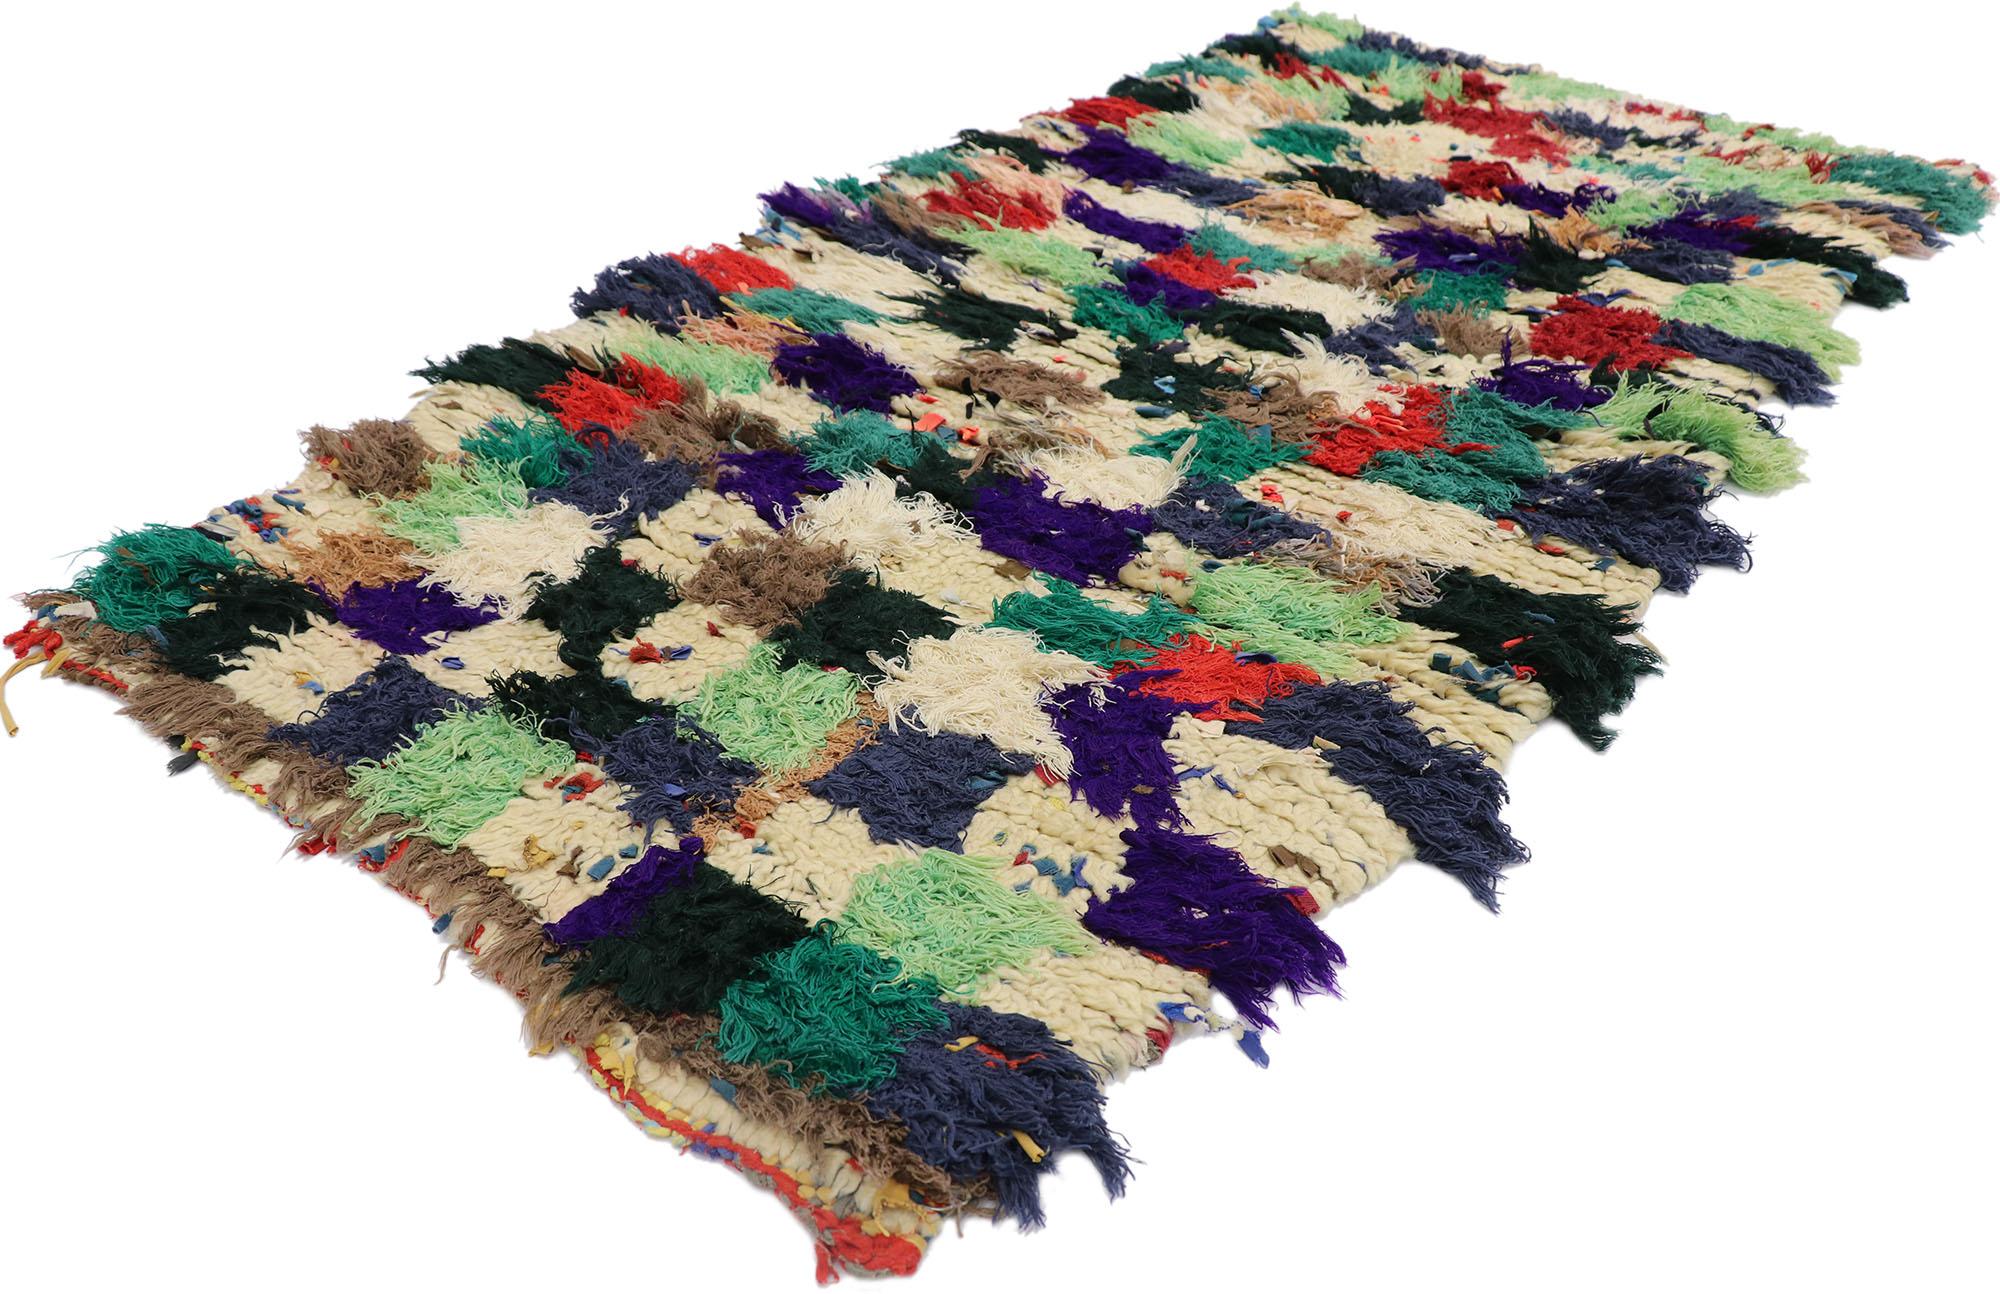 21537 Vintage Berber Moroccan Boucherouite Rug with Modern Cubist Style 02'08 x 05'07. Showcasing a bold expressive design, incredible detail and texture, this hand knotted cotton and wool vintage Berber Moroccan Boucherouite rug is a captivating